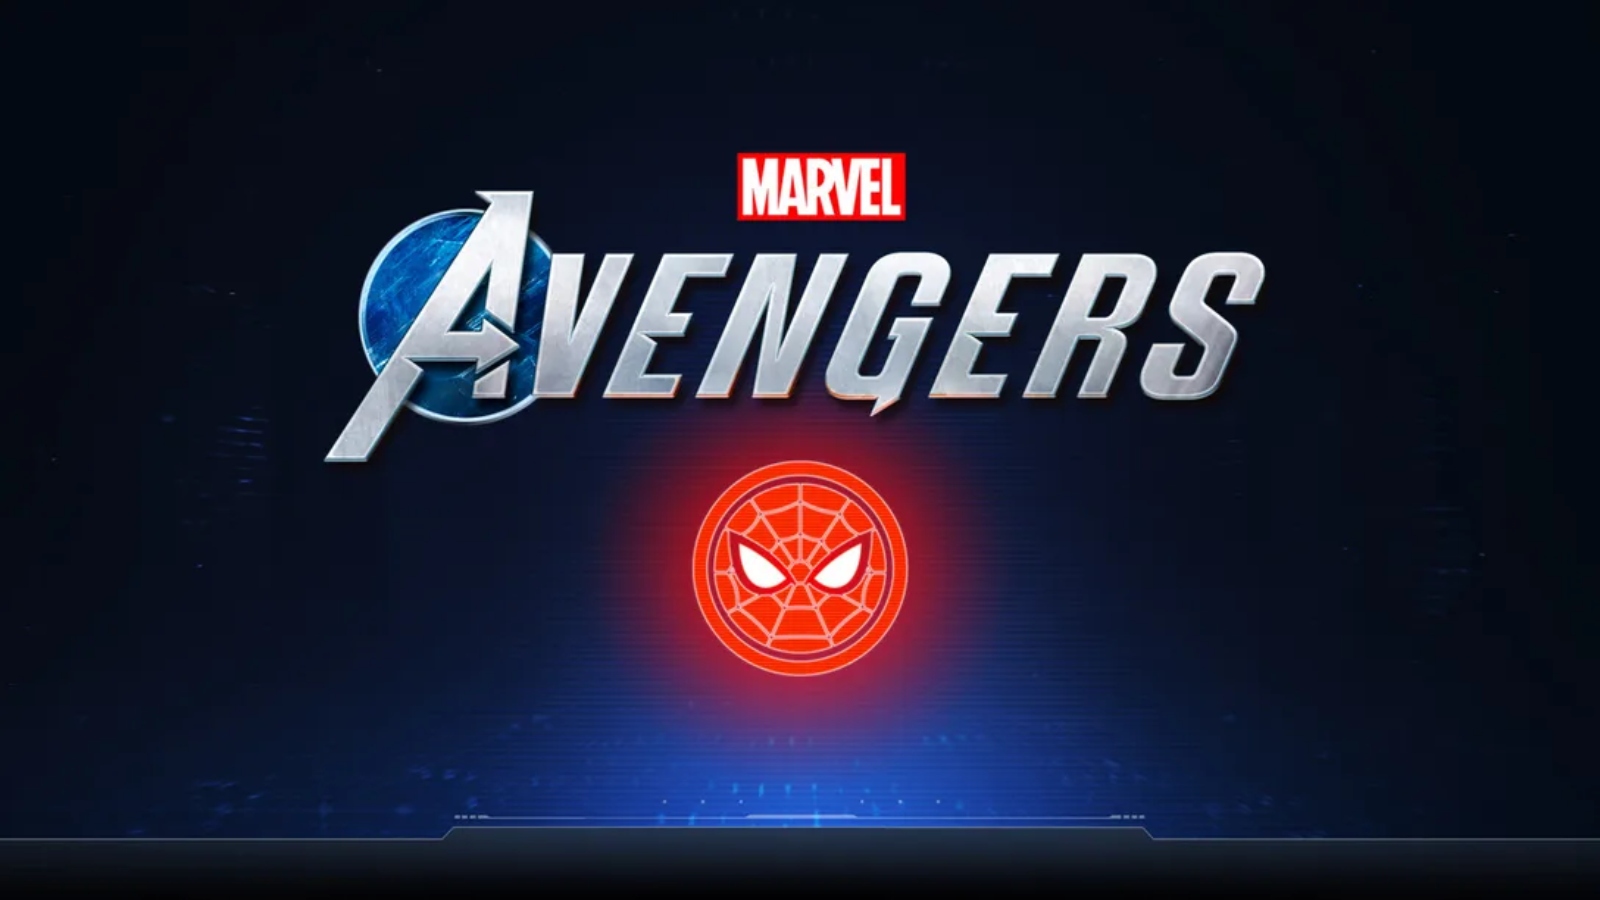 Crystal Dynamics Shares First Image Of Spider-Man In Marvel’s Avengers